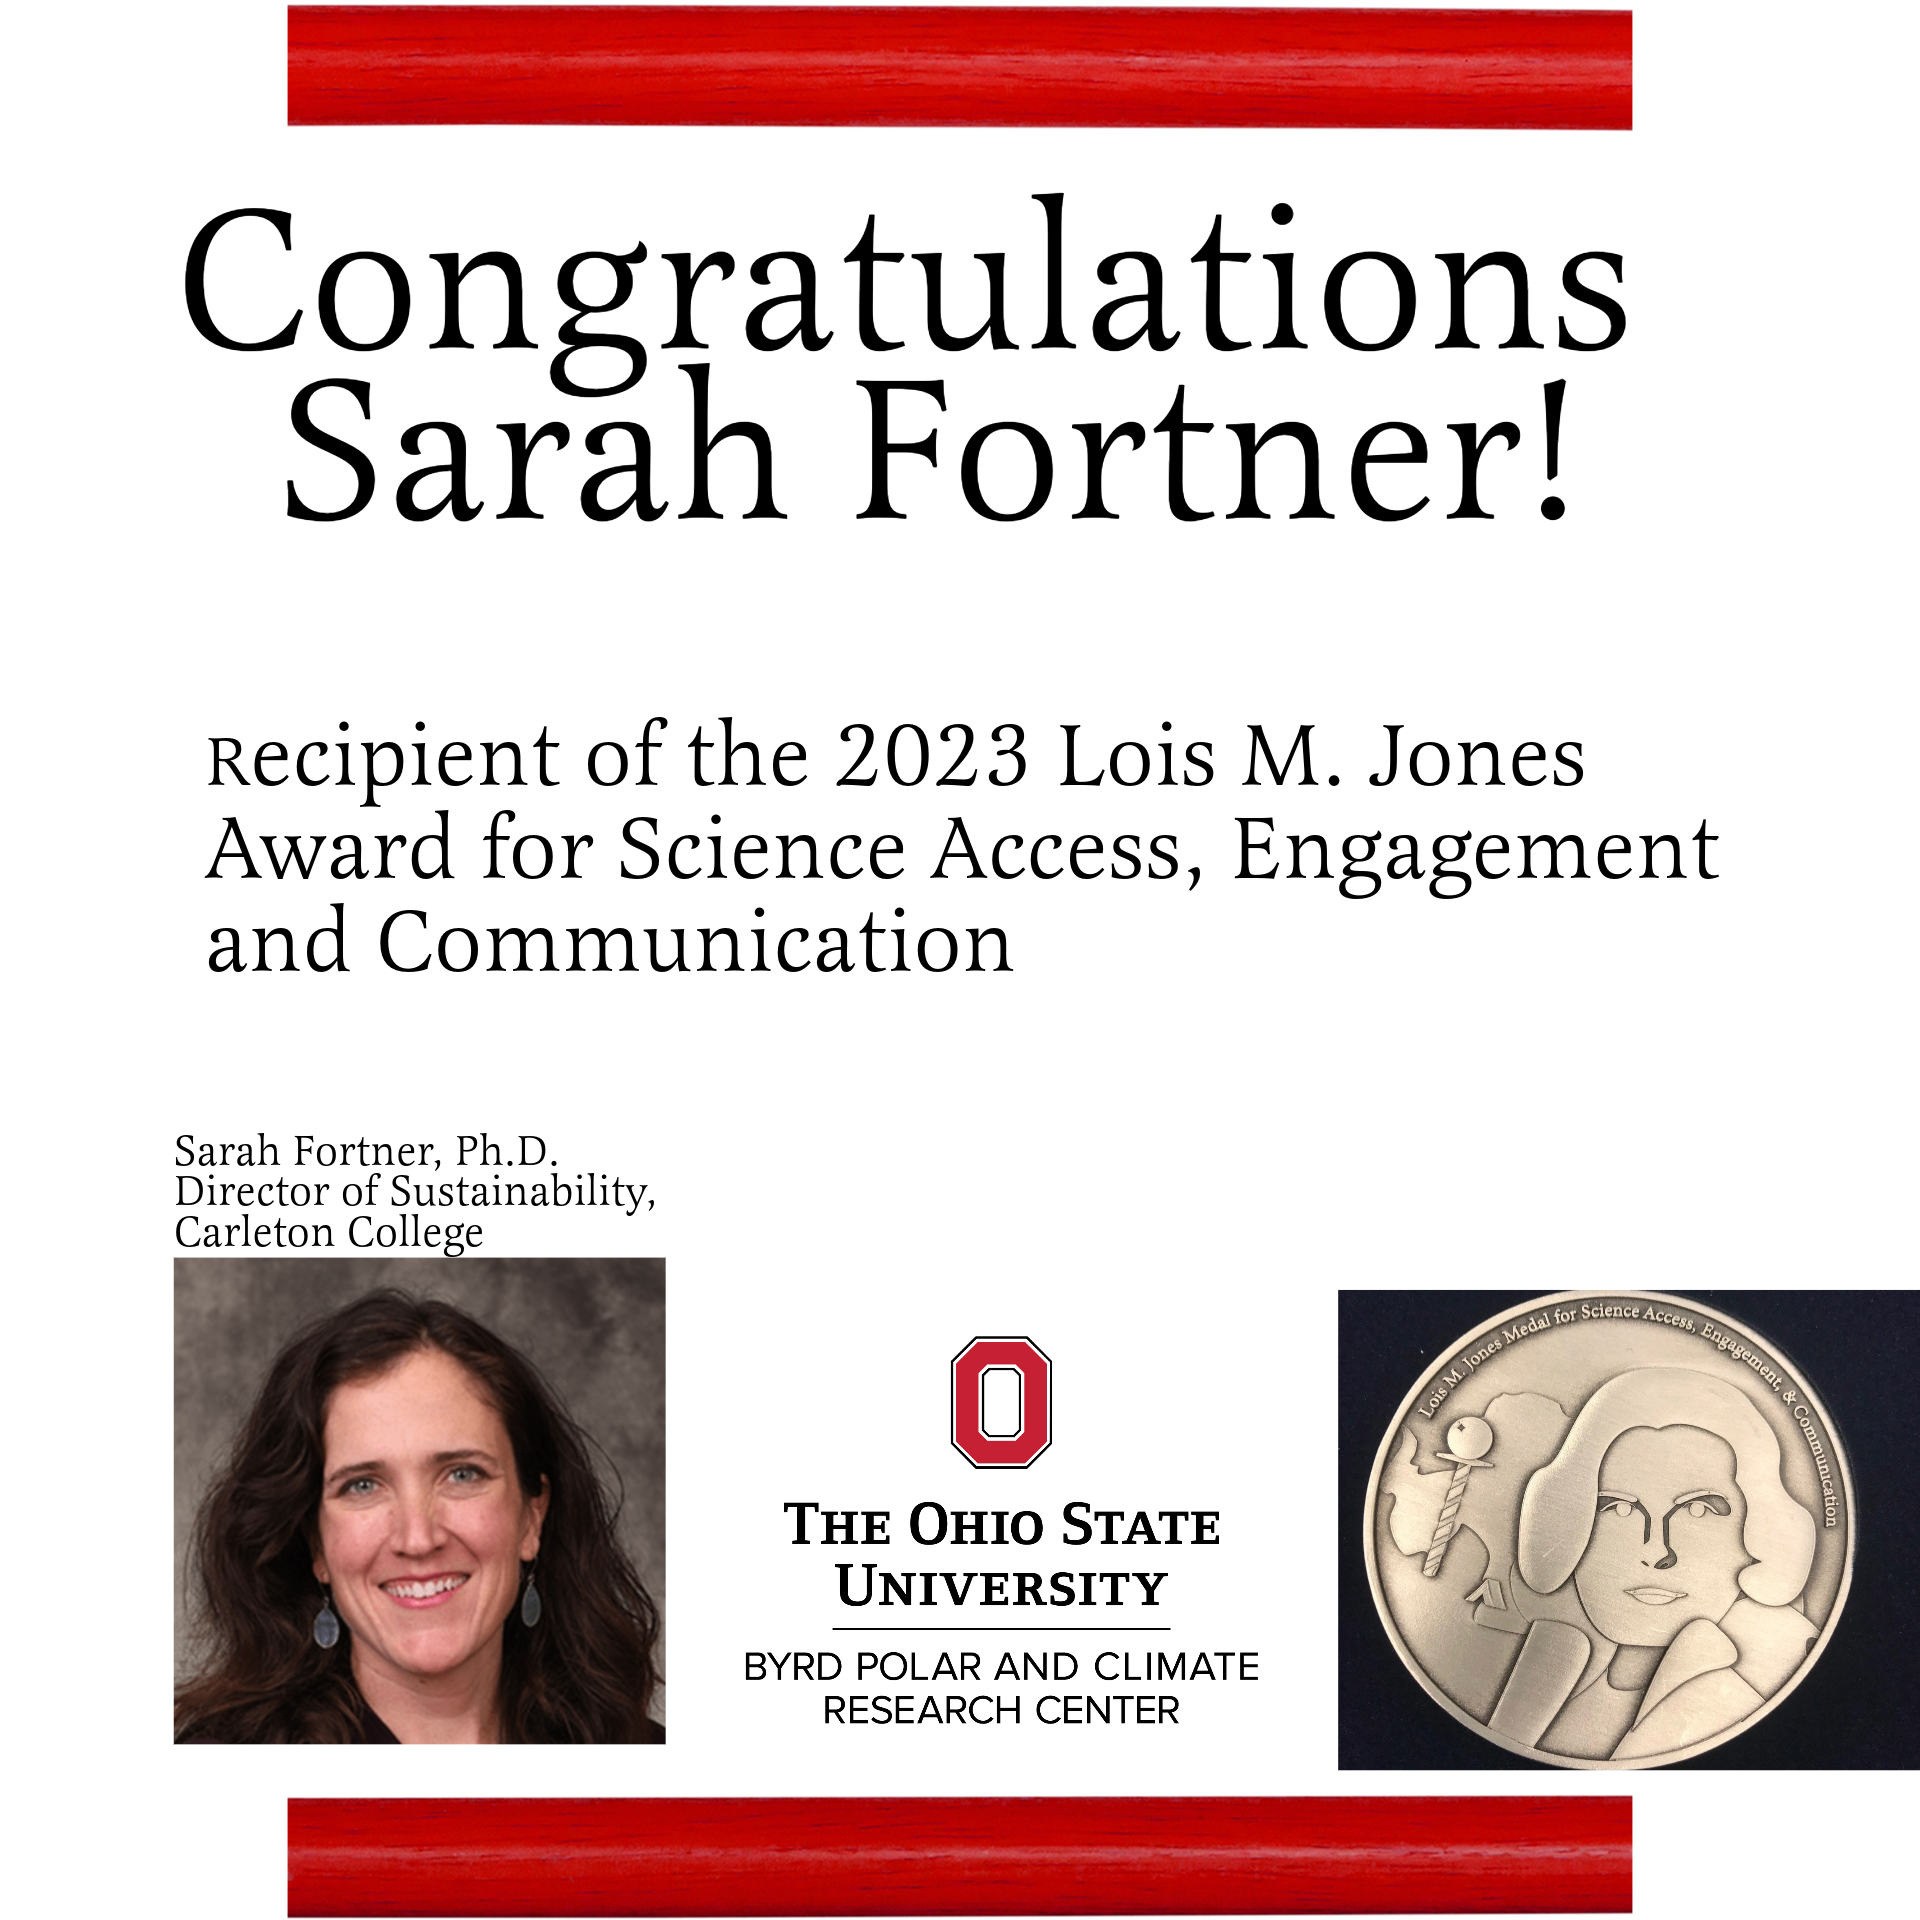 Flyer with image of Sarah Fortner and Lois Jones Medal and Byrd Center logo in the middle. Text reads: Congratulations Sarah Fortner! Recipient of the 2023 Lois M. Jones Award for Science Access, Engagement and Communication Sarah Fortner, Ph.D. Director of Sustainability, Carleton College